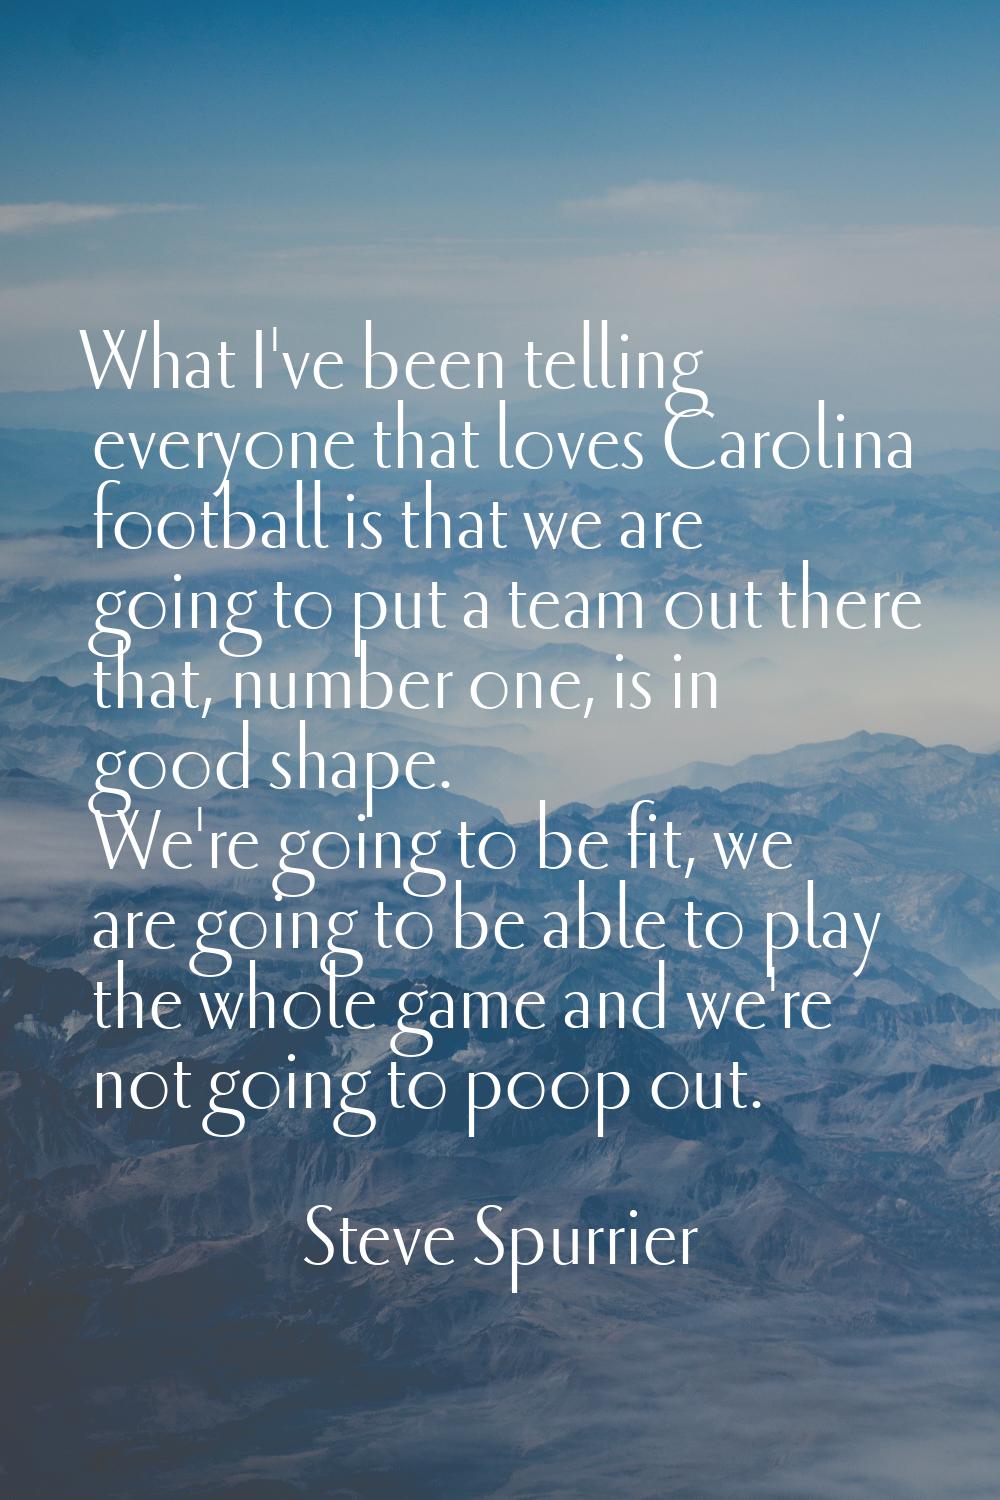 What I've been telling everyone that loves Carolina football is that we are going to put a team out